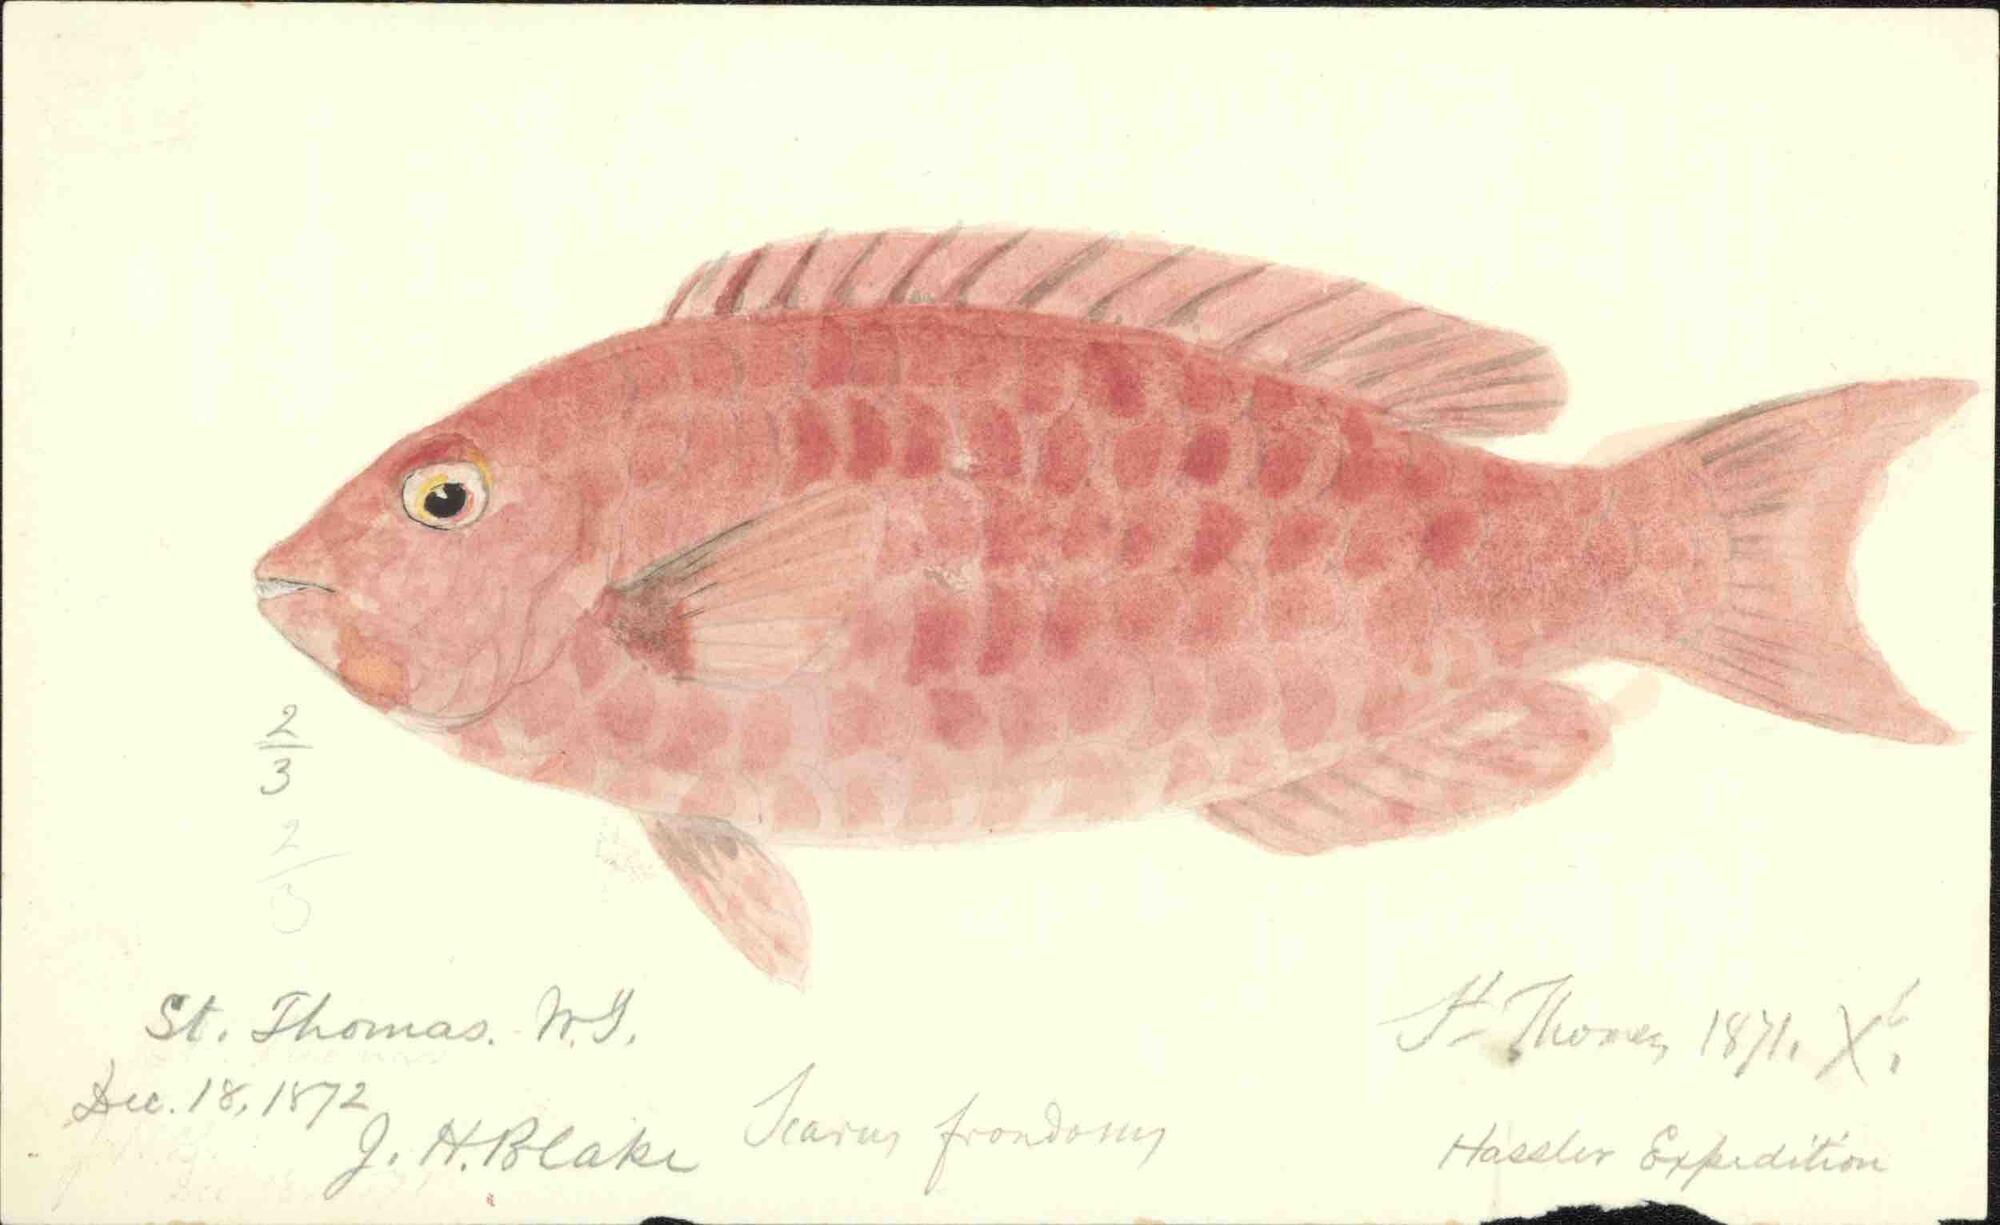 watercolor of a red scaled fish, its eye peering toward the viewer dated December 18th 1872